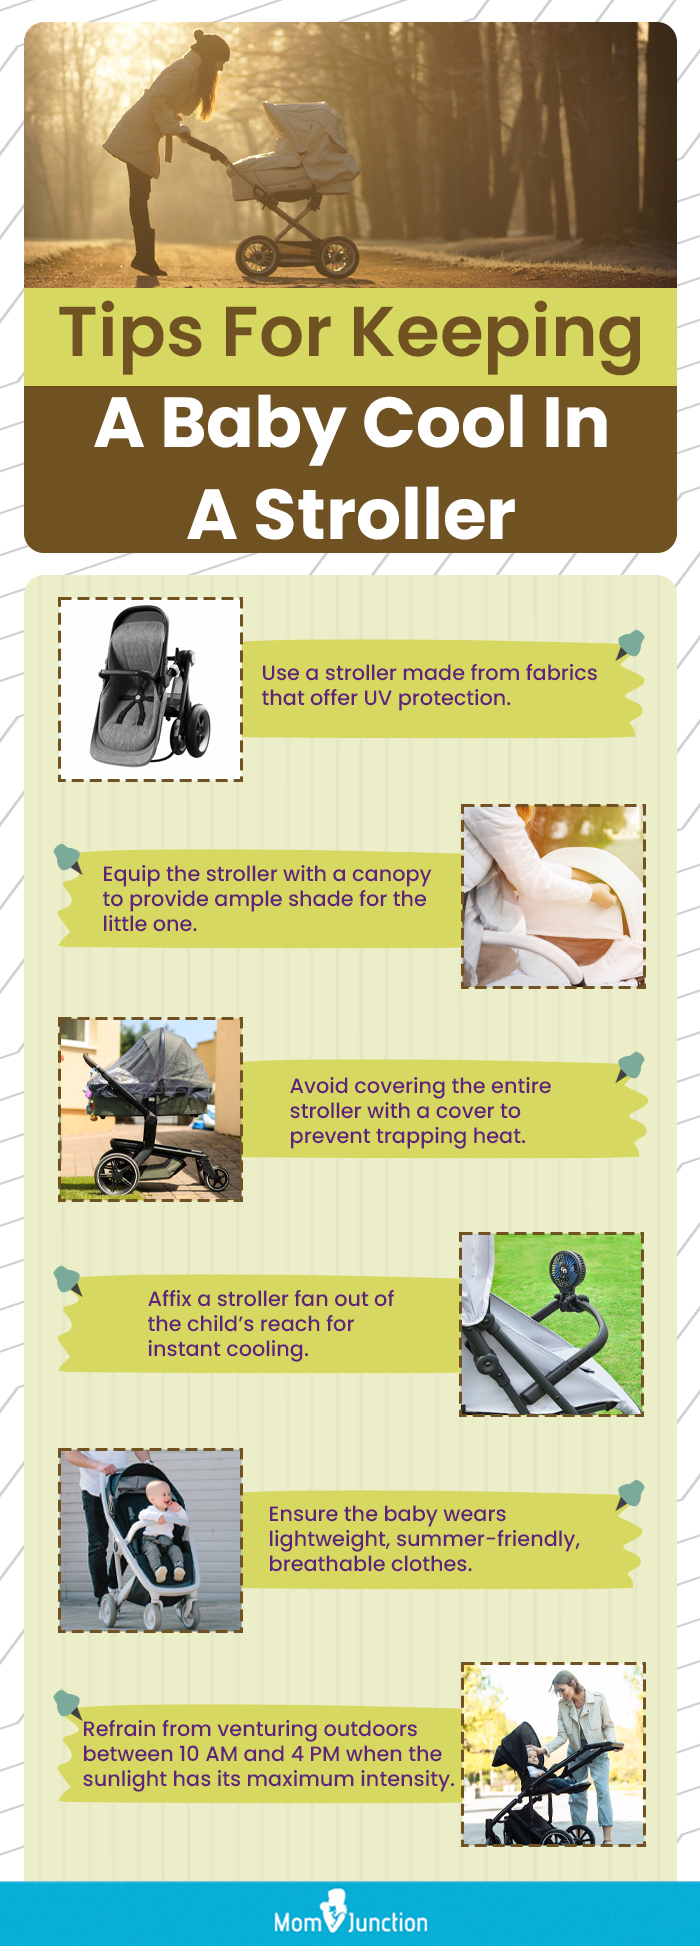 Tips For Keeping A Baby Cool In A Stroller (infographic)